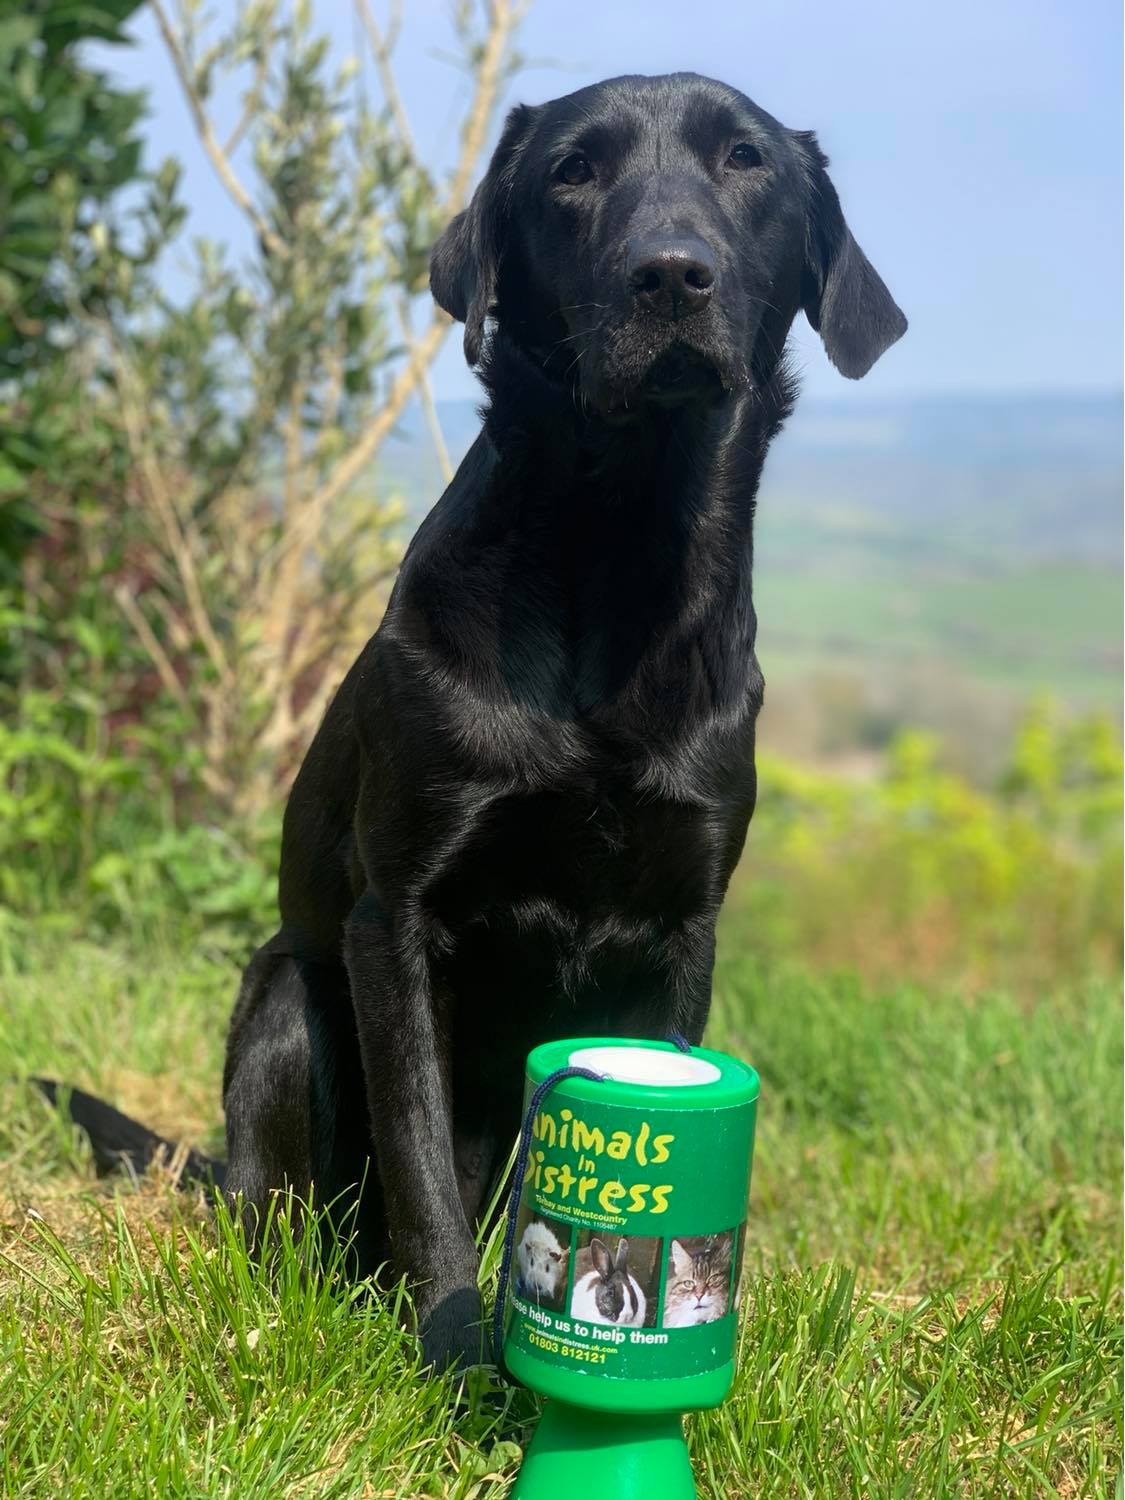 Black Labrador sat with charity collection tin